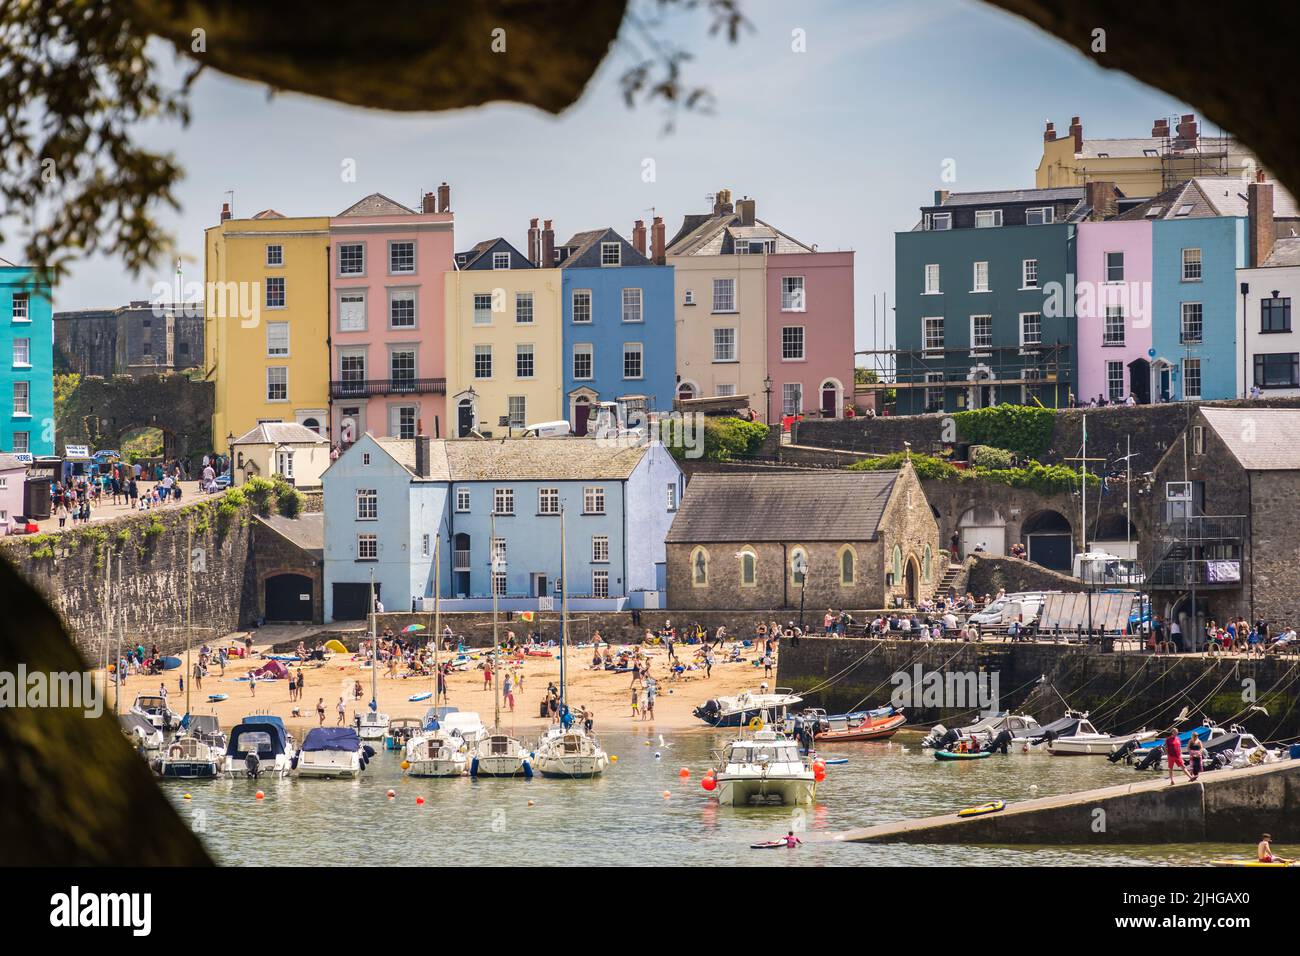 Tenby, Wales - May 2021 : Port and marina in the beautiful little town called Tenby in Pembrokeshire, Carmarthen Bay, Wales, Great Britain Stock Photo